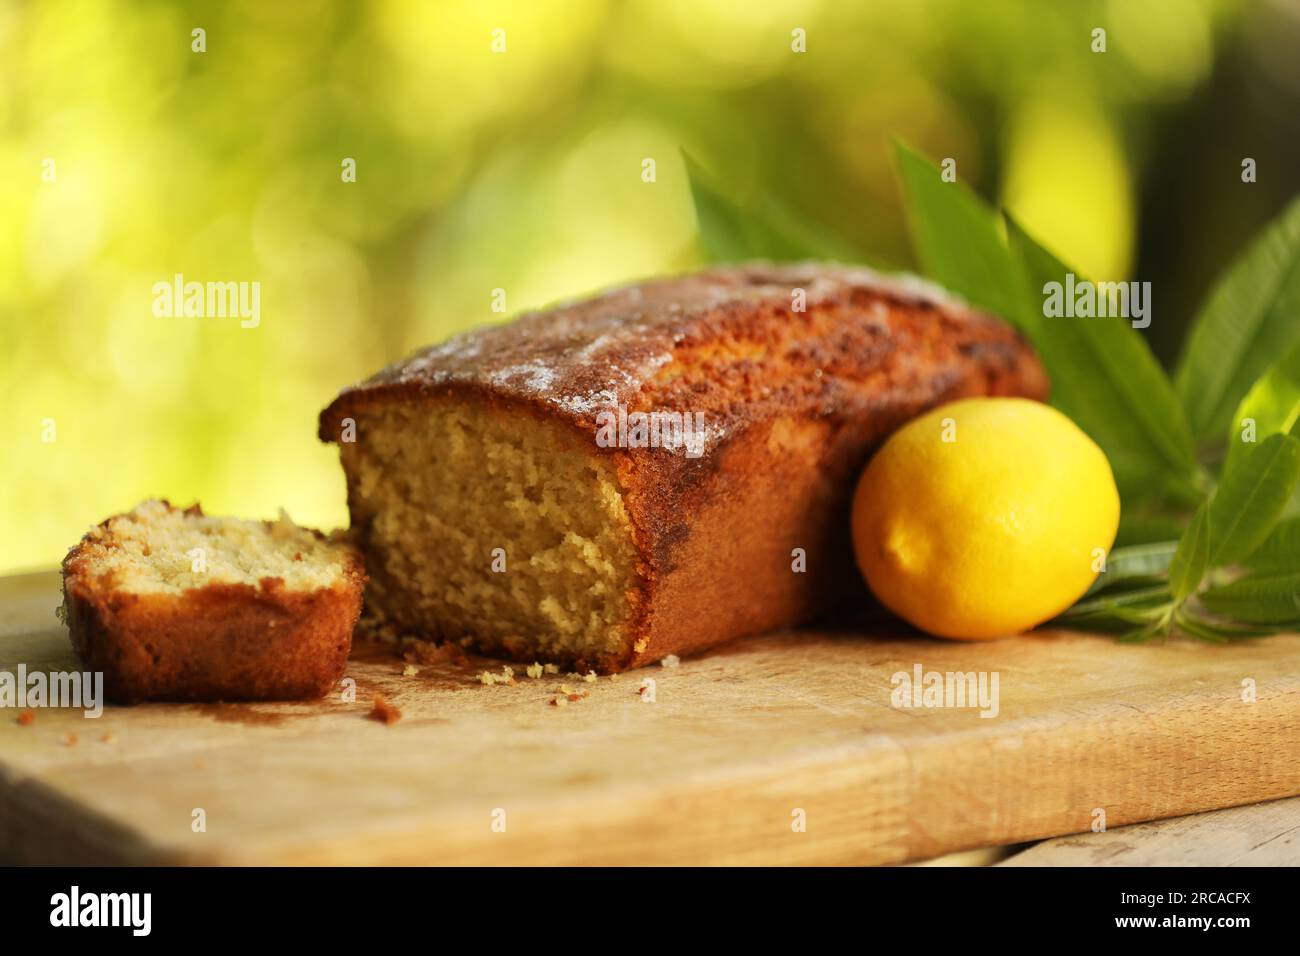 Lemon Drizzle Cake on a wooden board Stock Photo